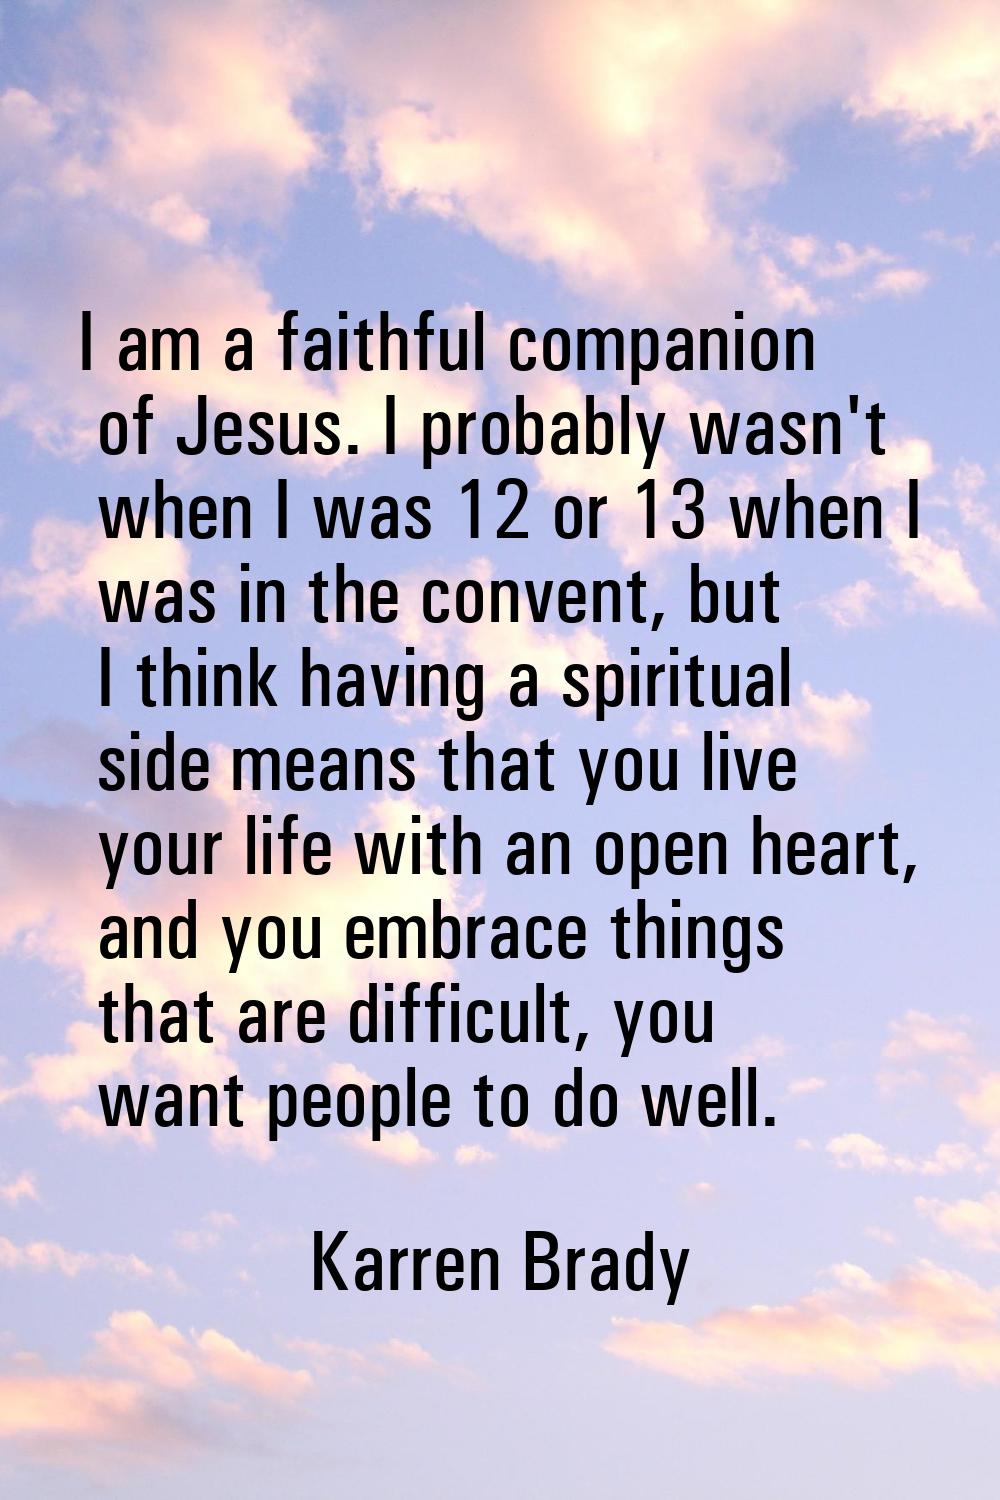 I am a faithful companion of Jesus. I probably wasn't when I was 12 or 13 when I was in the convent